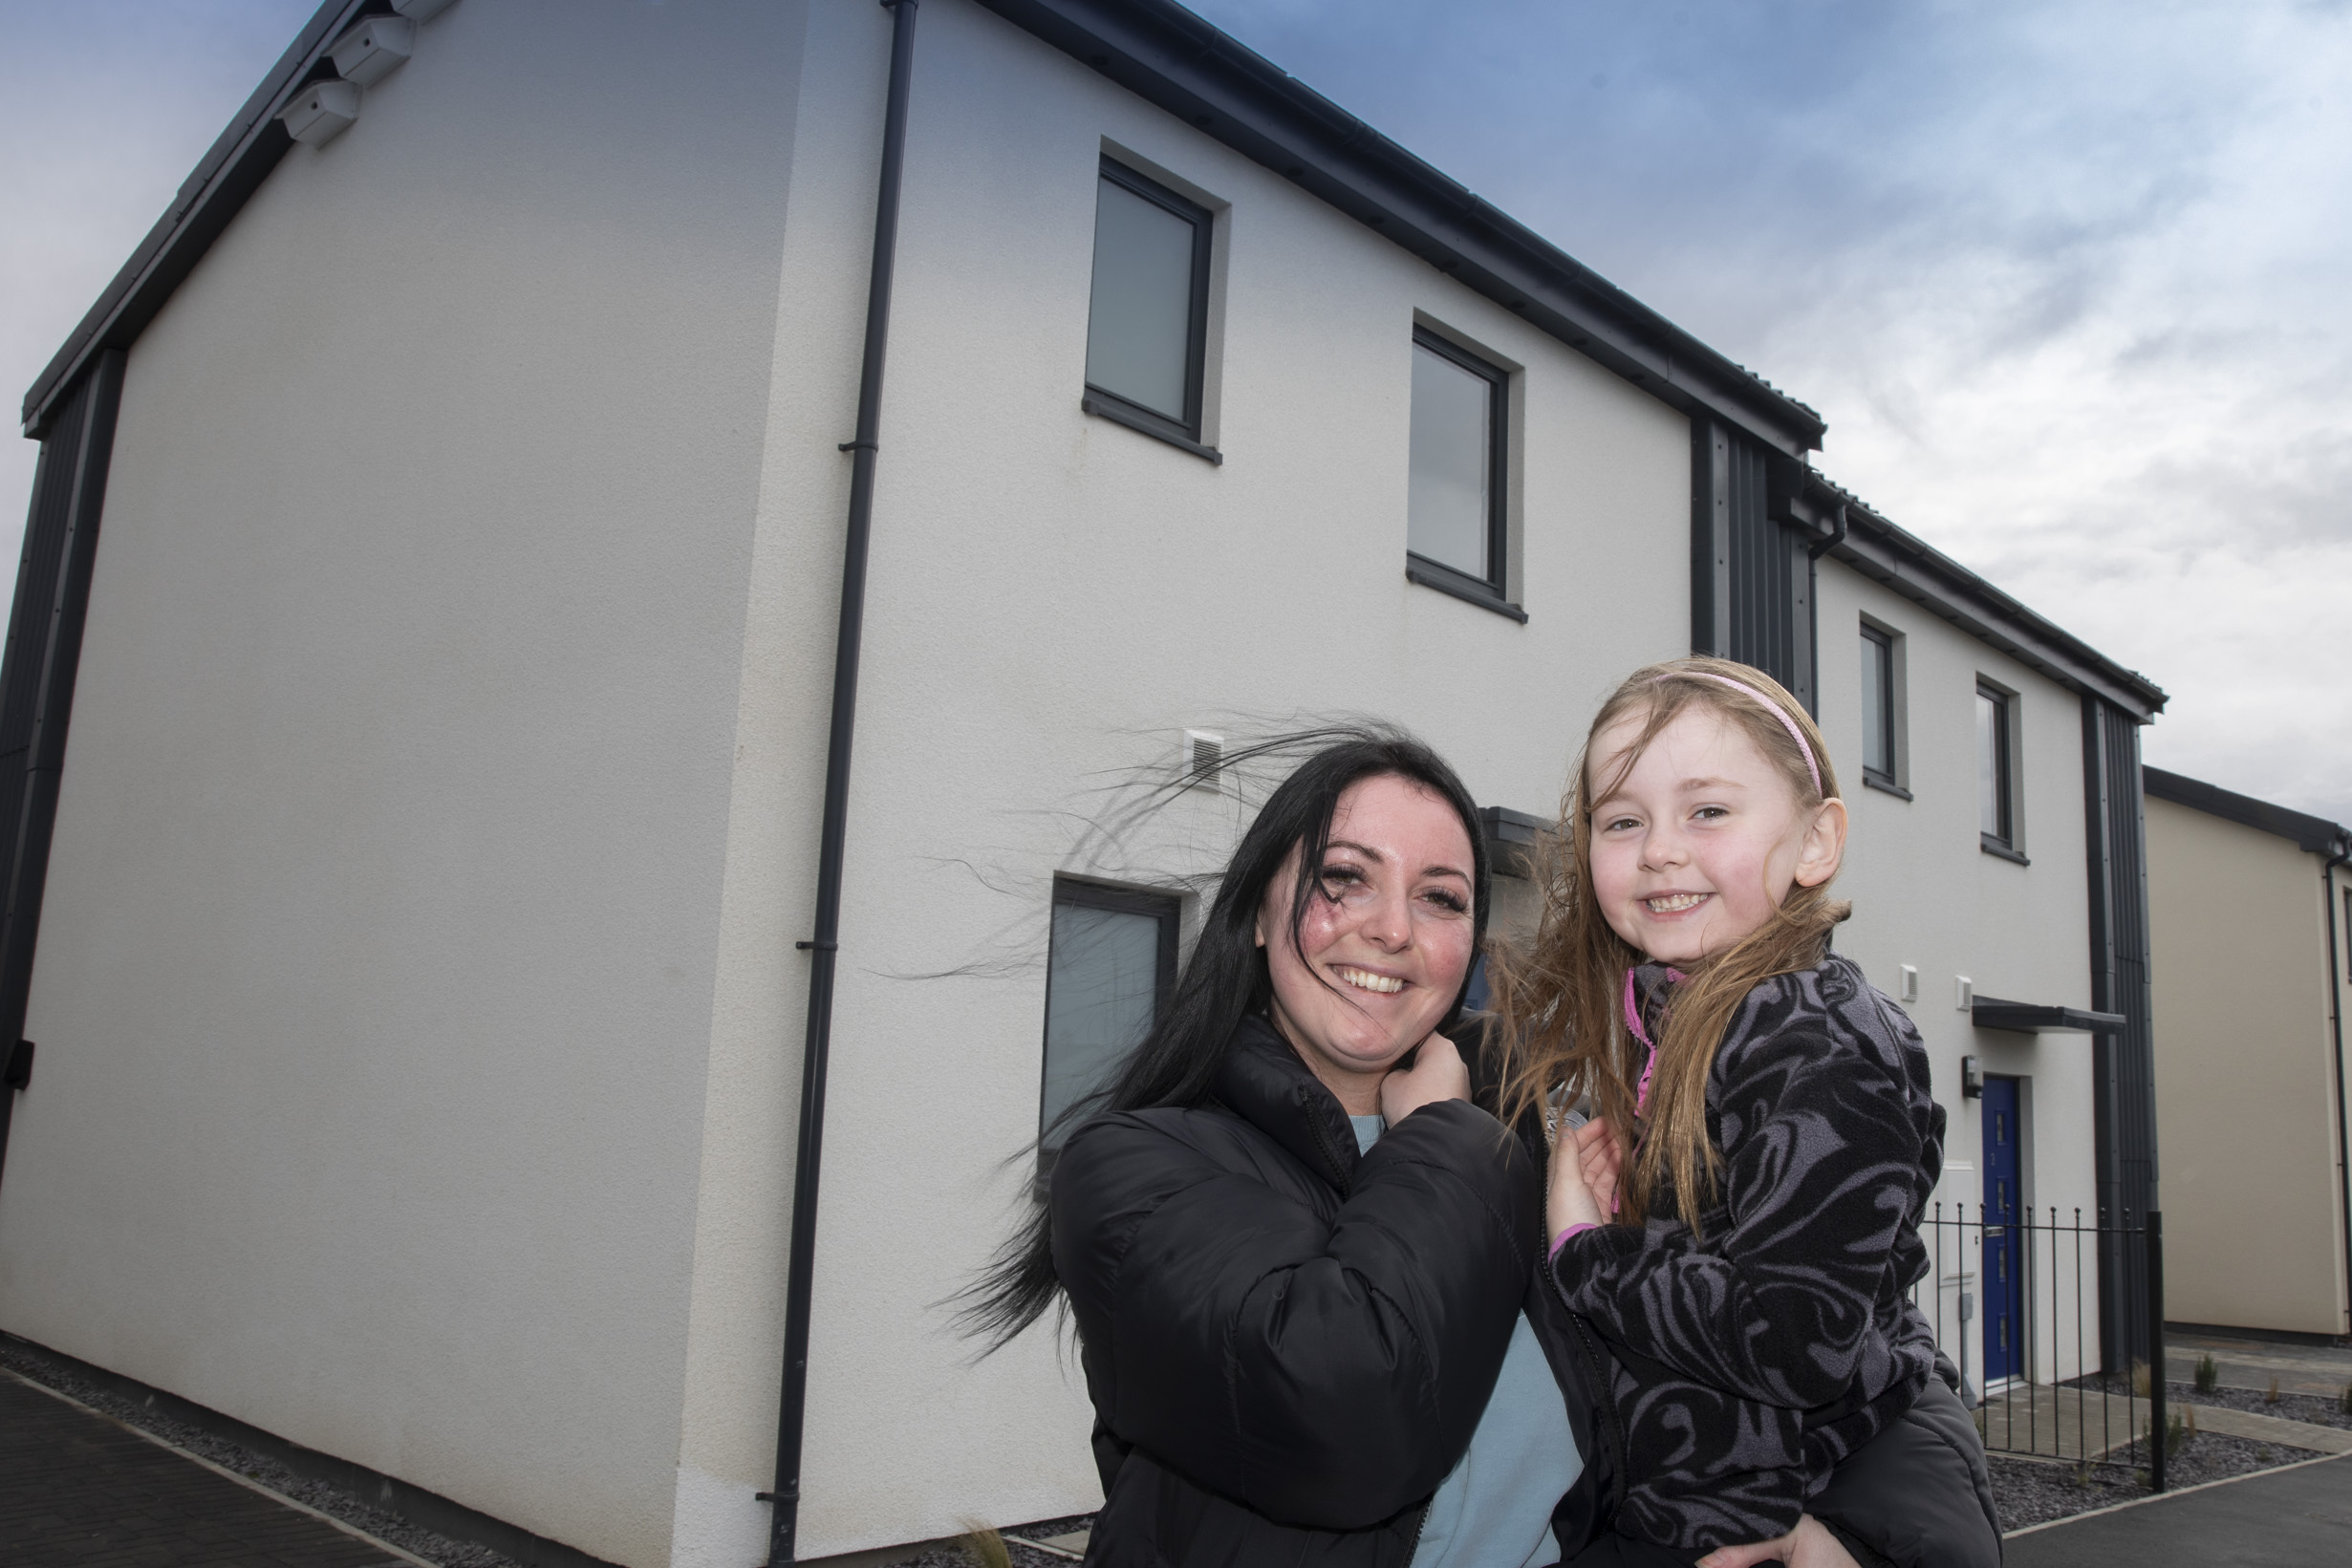 Excited residents move into new eco-friendly housing development in The Mart, Valley